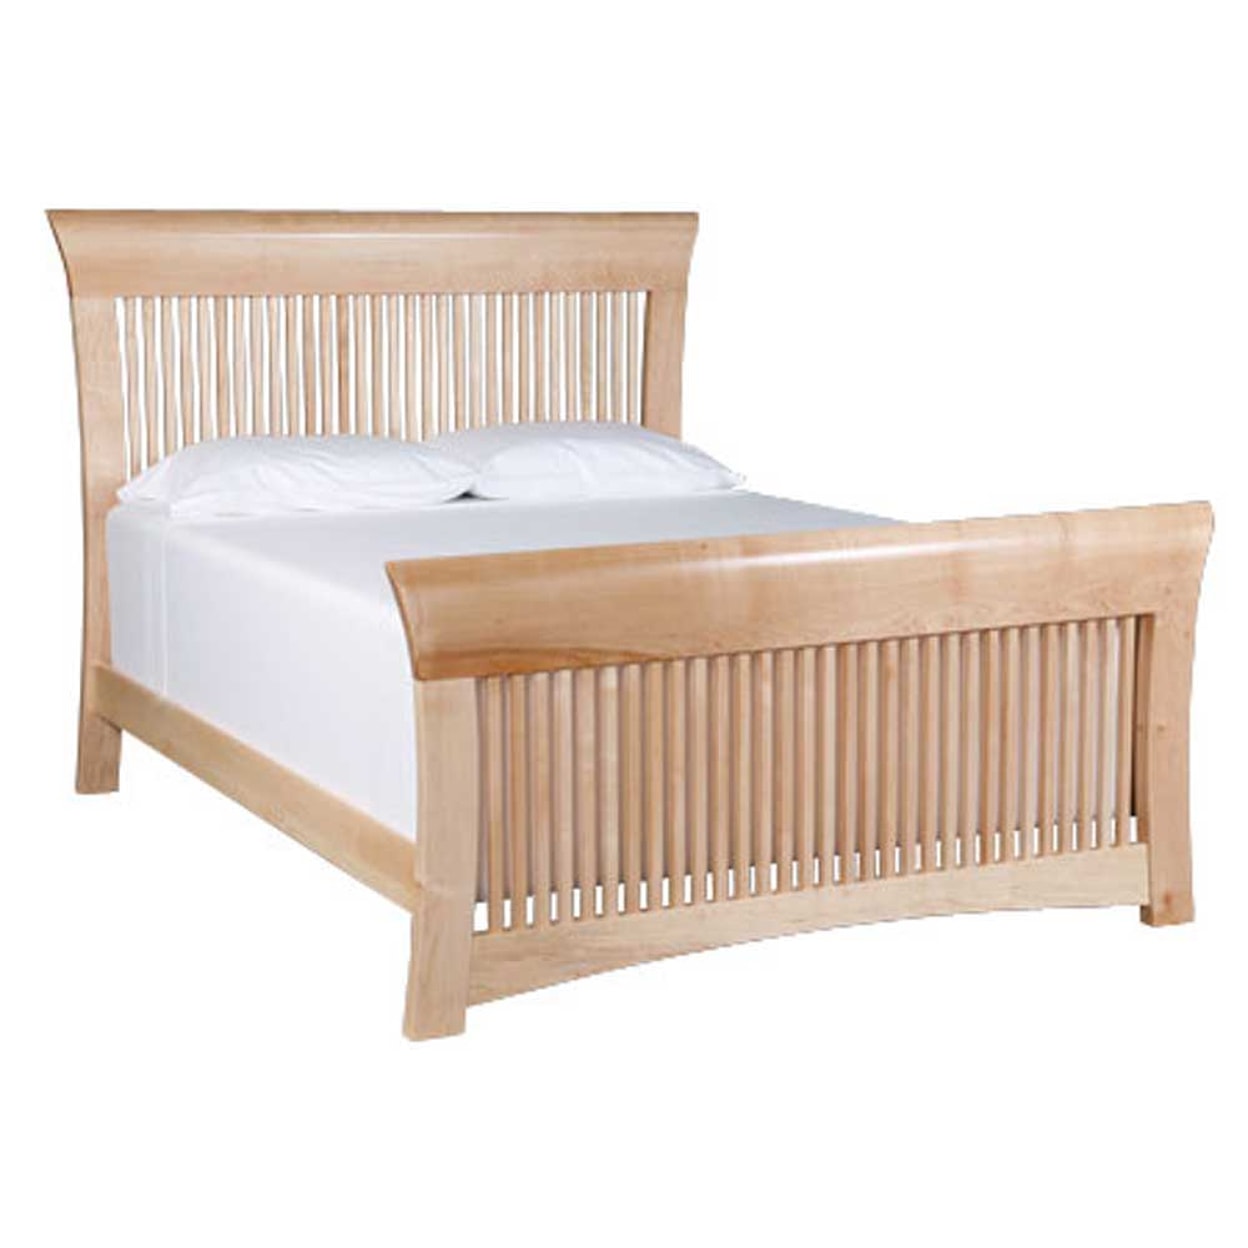 Simply Amish Loft California King Spindle Bed